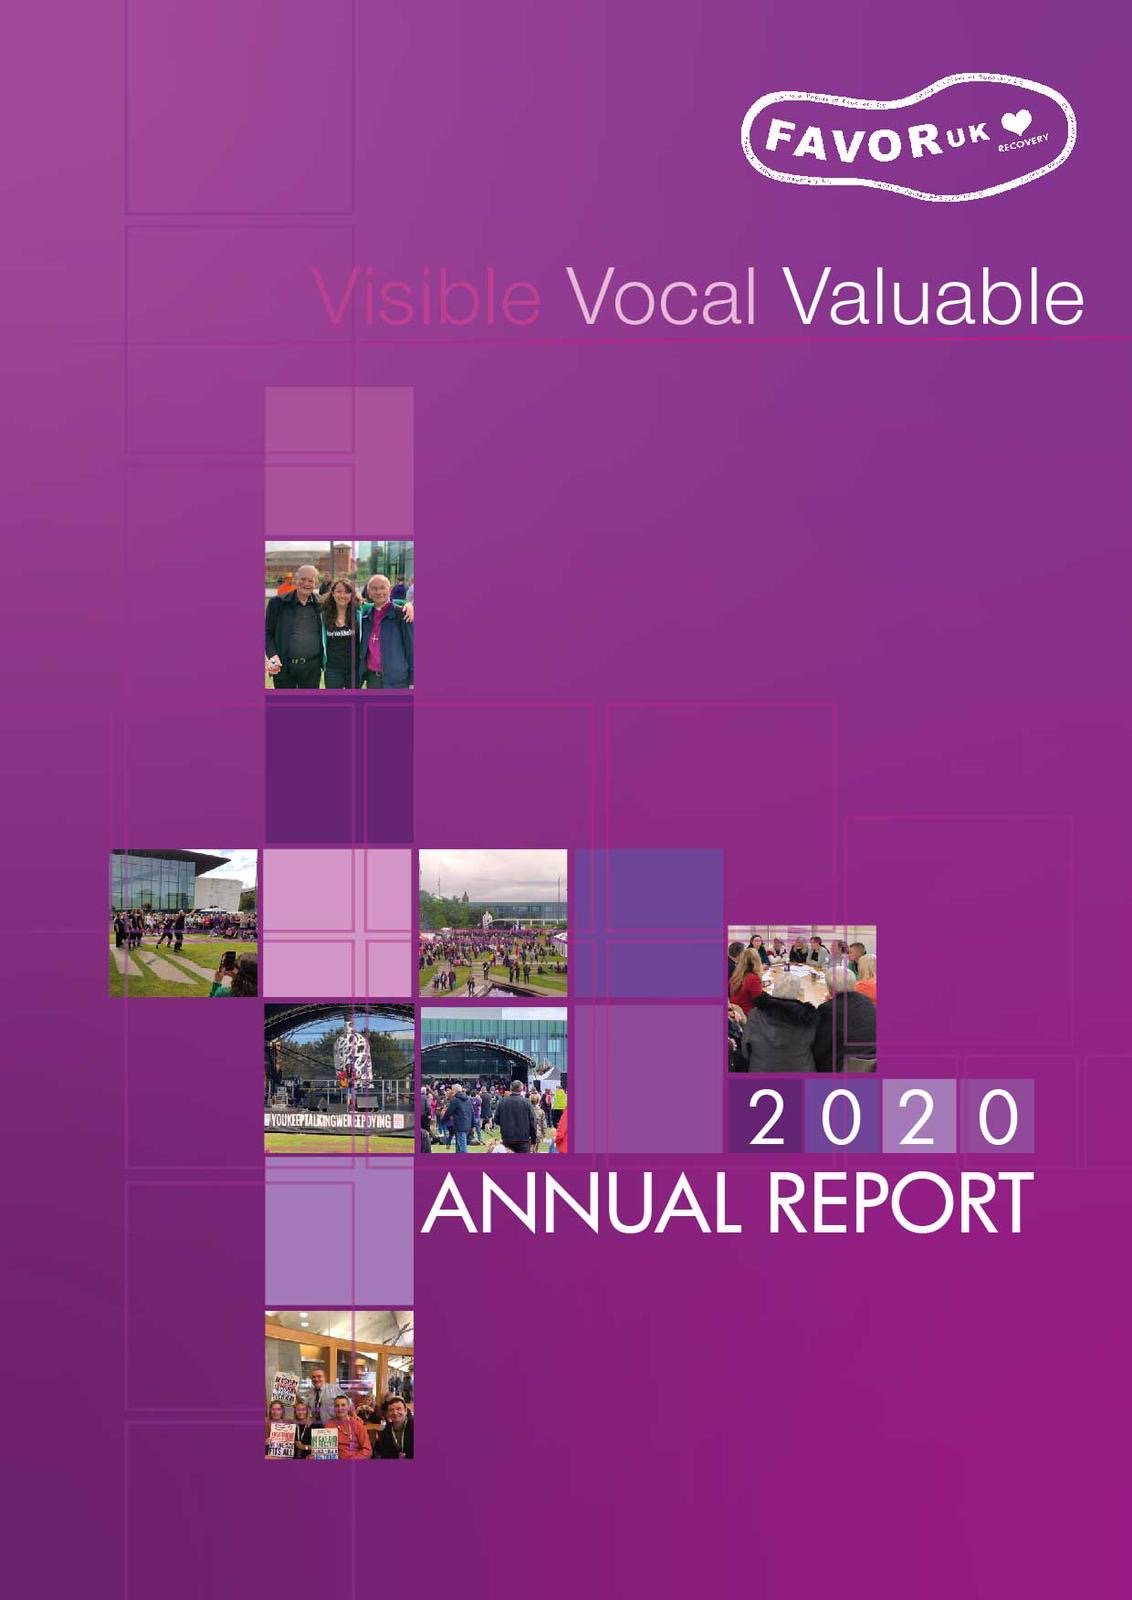 Our Annual Report 2019/20